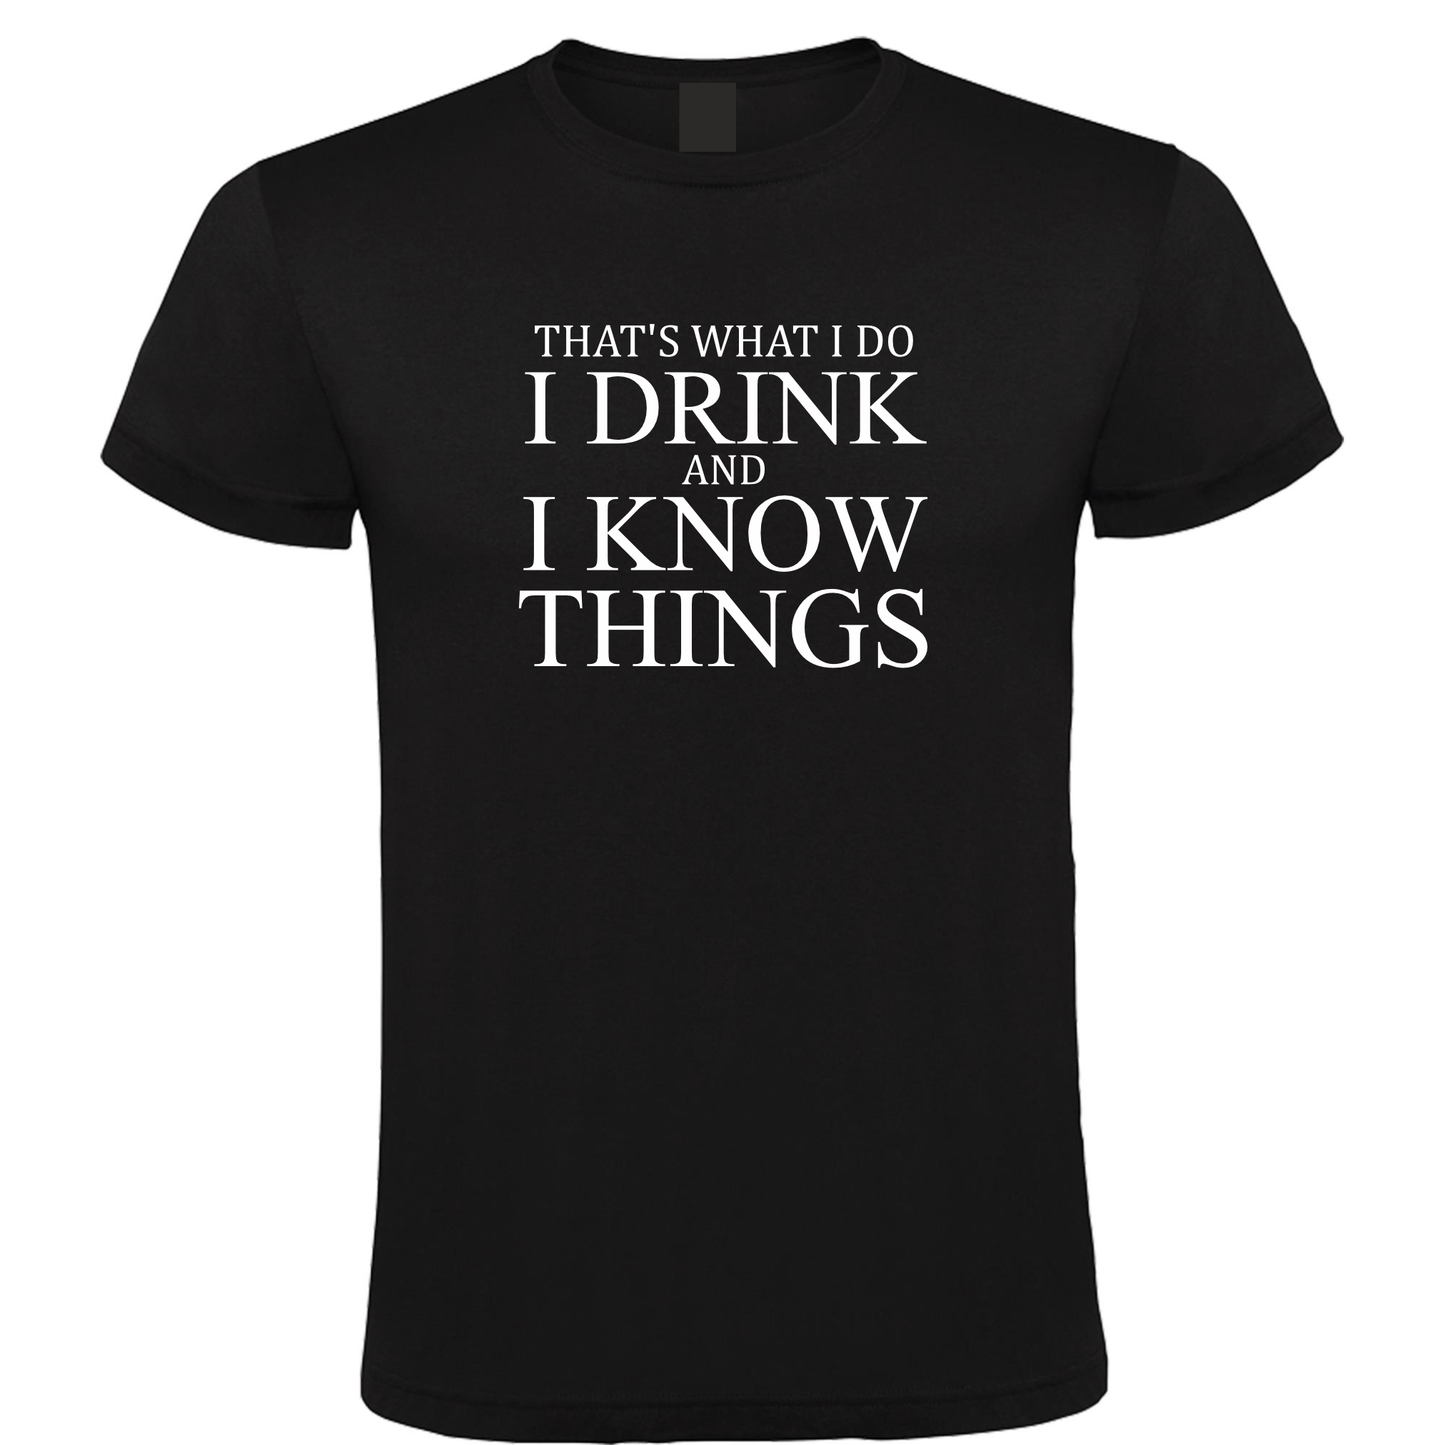 That's What I Do, I Drink and I Know Things